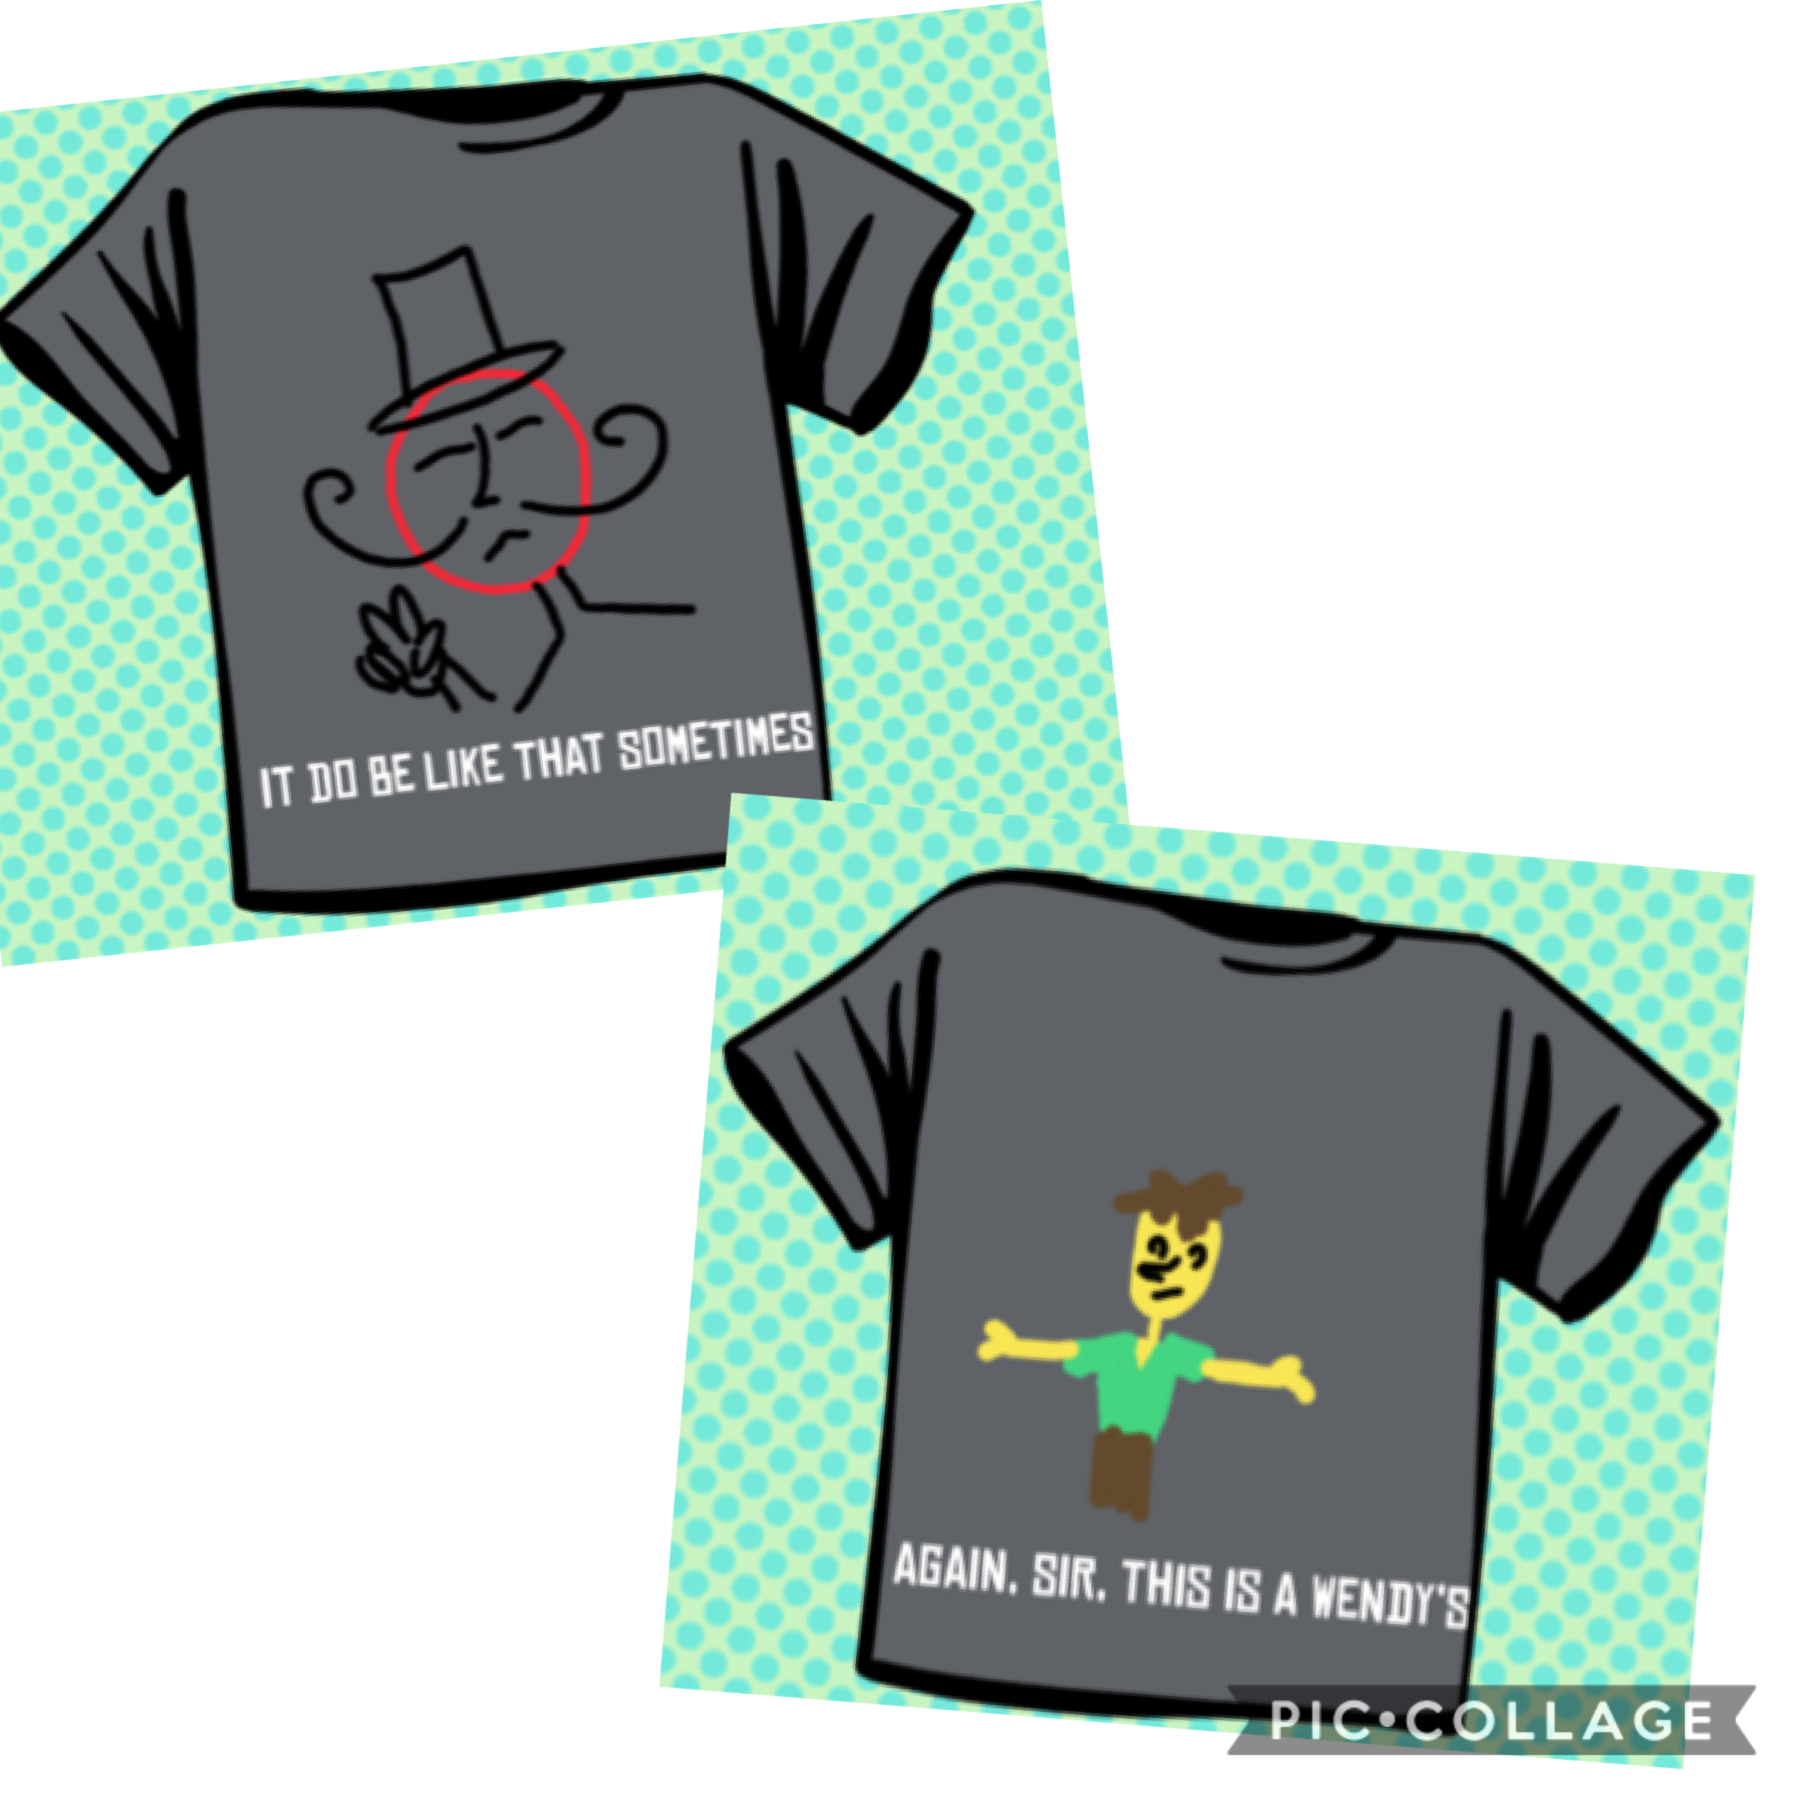 My cousins and I were playing Jackbox and these were some of the shirts we came up with
I did one of the drawings and both the slogans ✌️